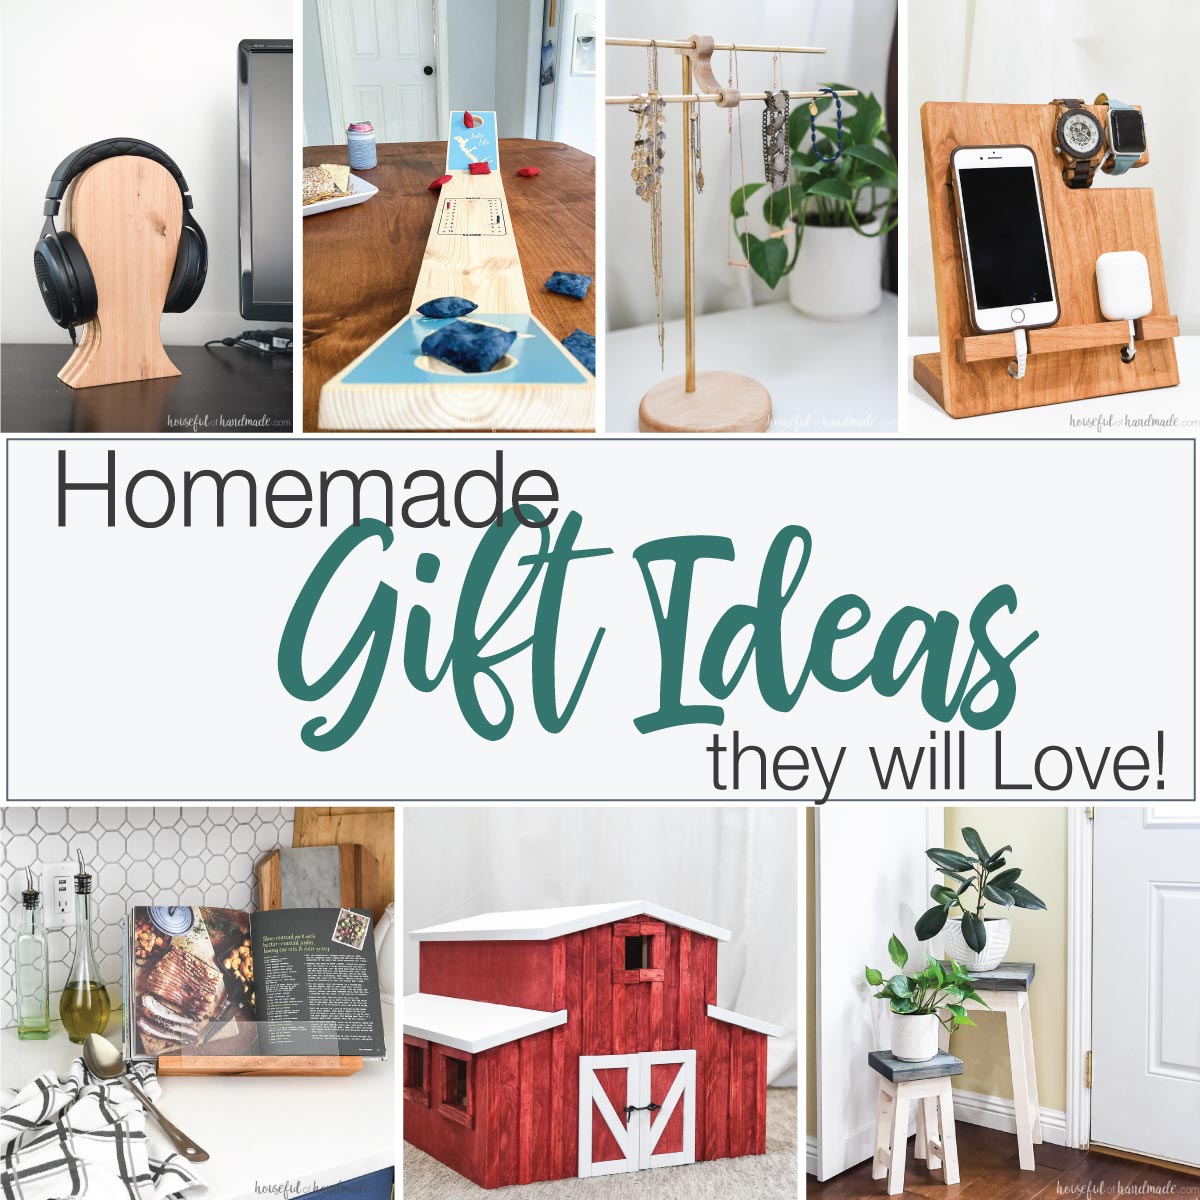 7 of the 50+ homemade gift ideas in a collage with words "Homemade Gift Ideas they will love!"